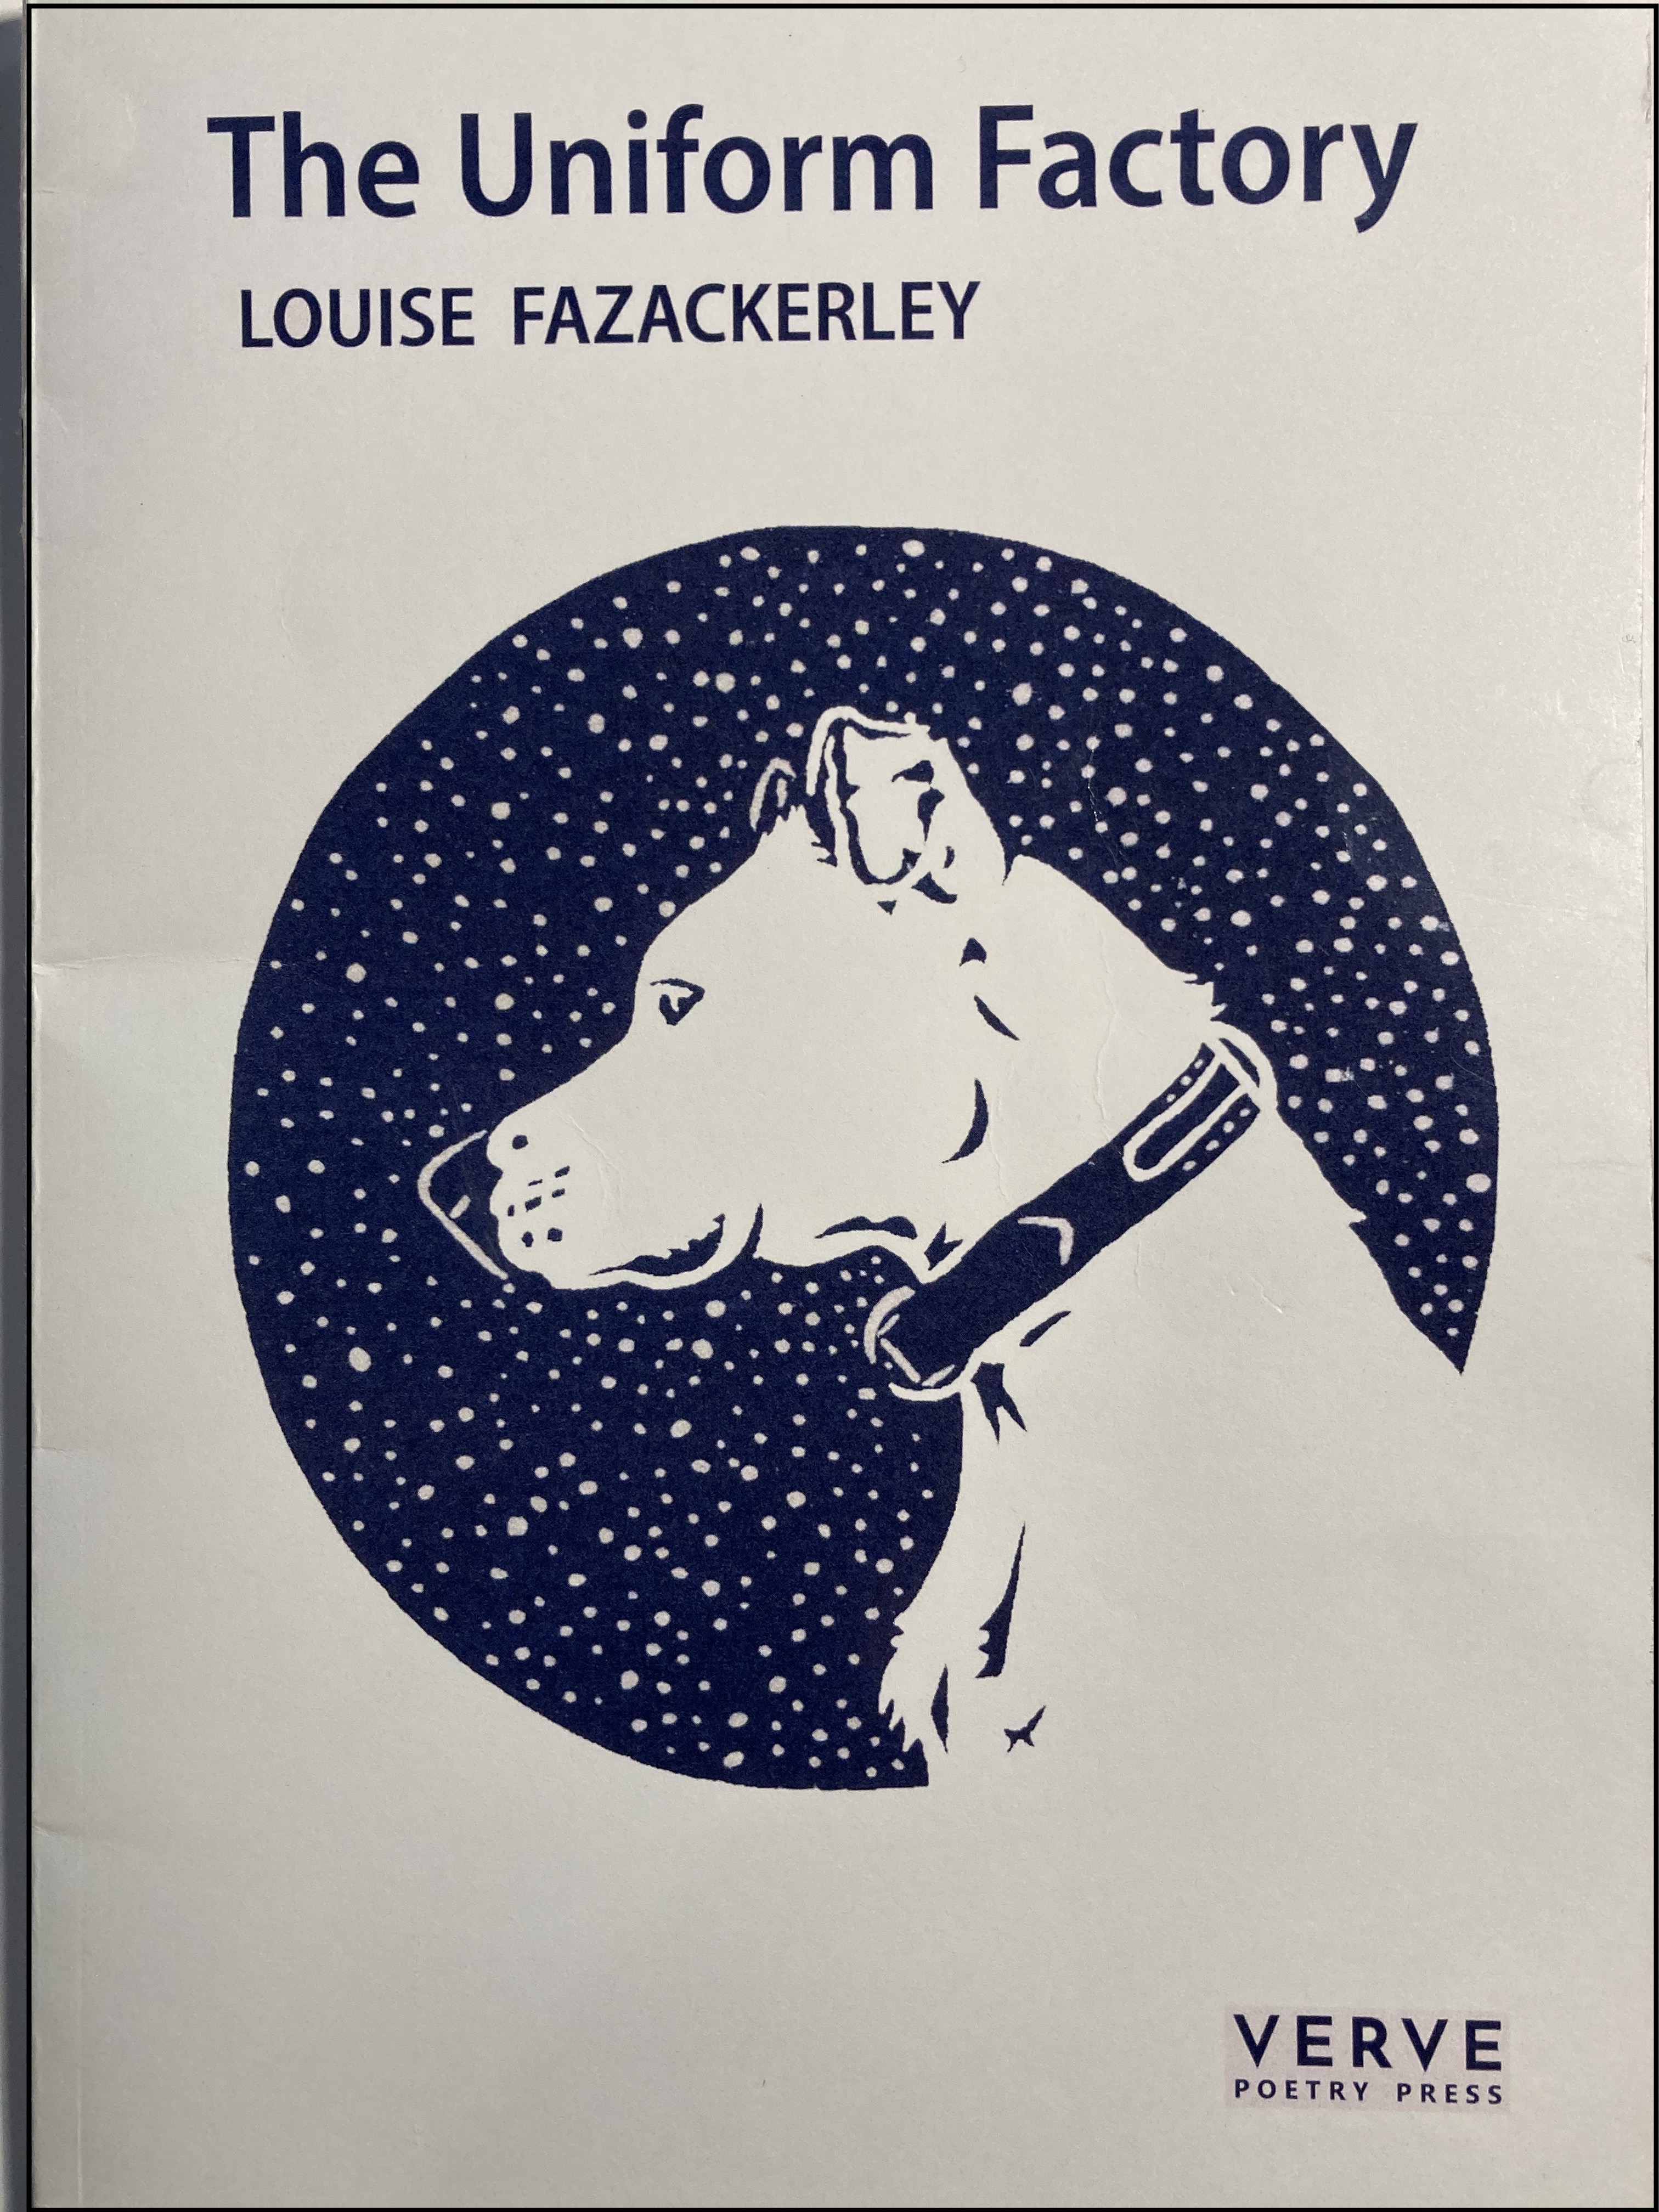 Pale cover with blue lettering and central image: a blue circle with a white dog and spots like snow